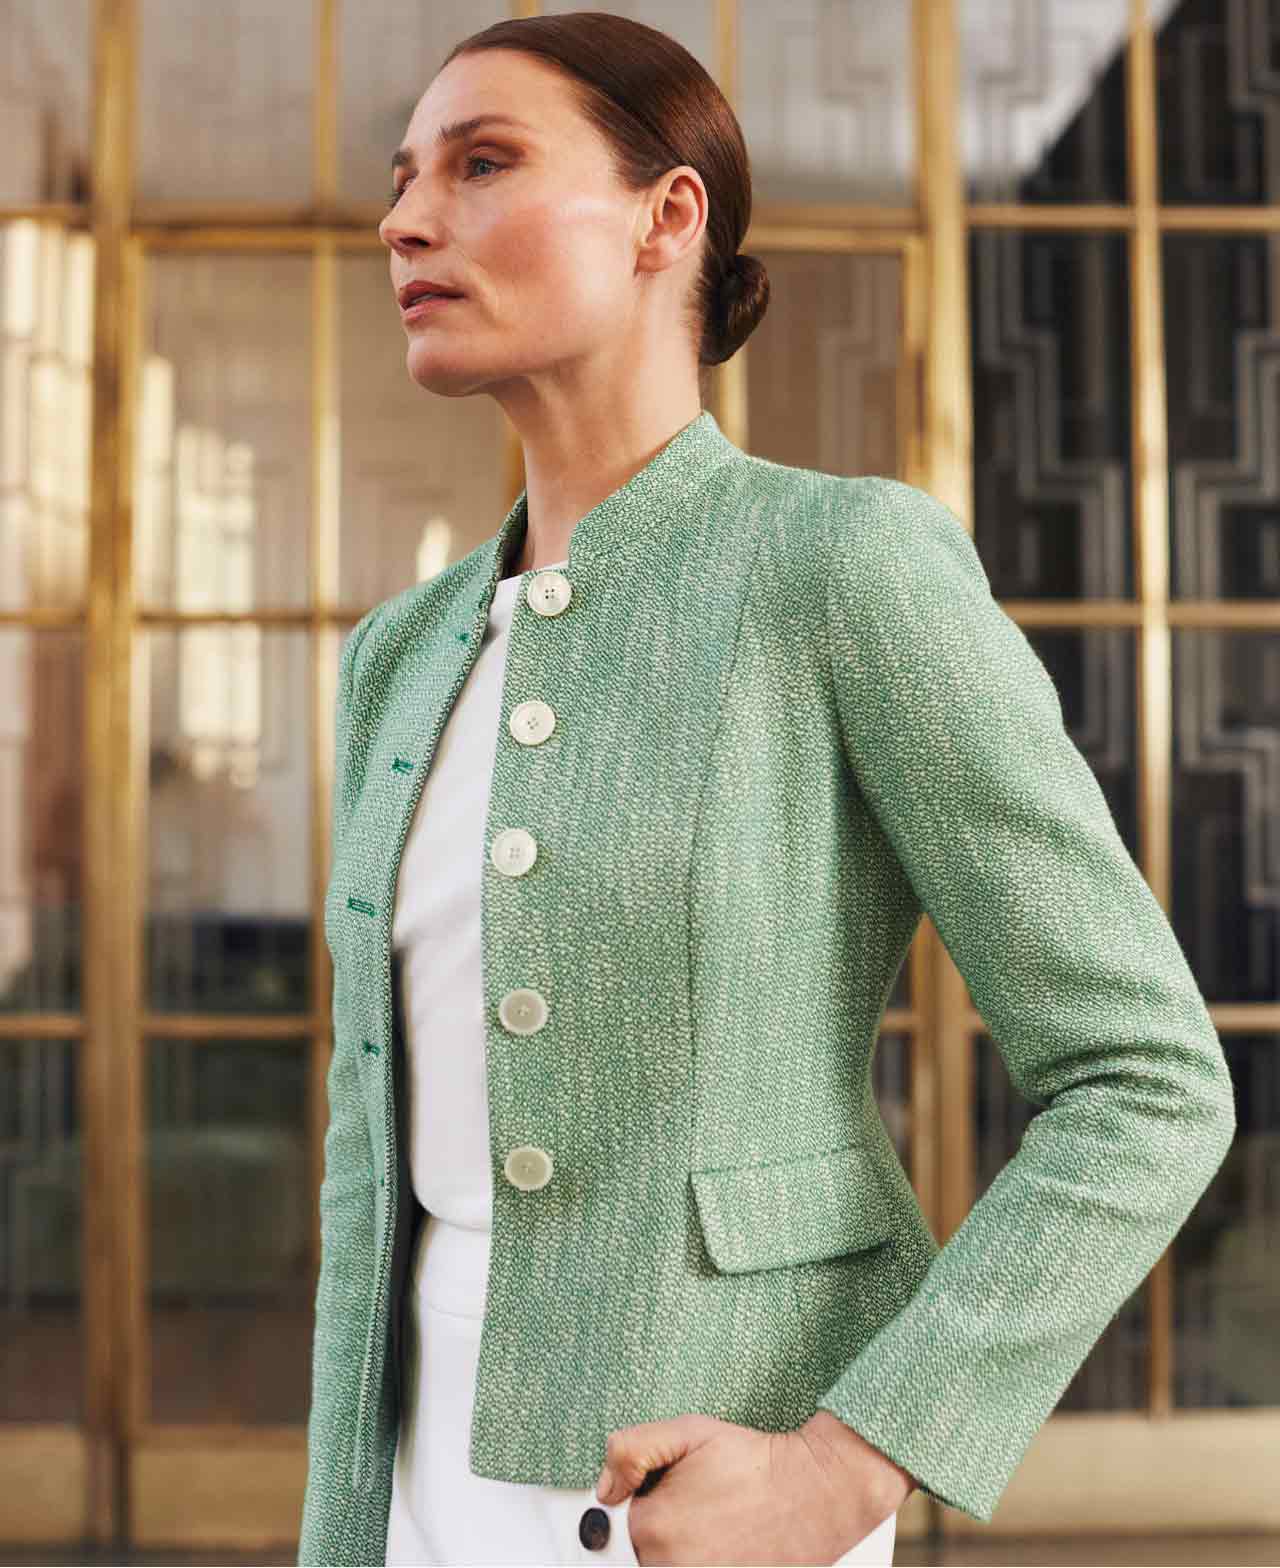 Hobbs wears a green tailored tweed jacket and white trousers.